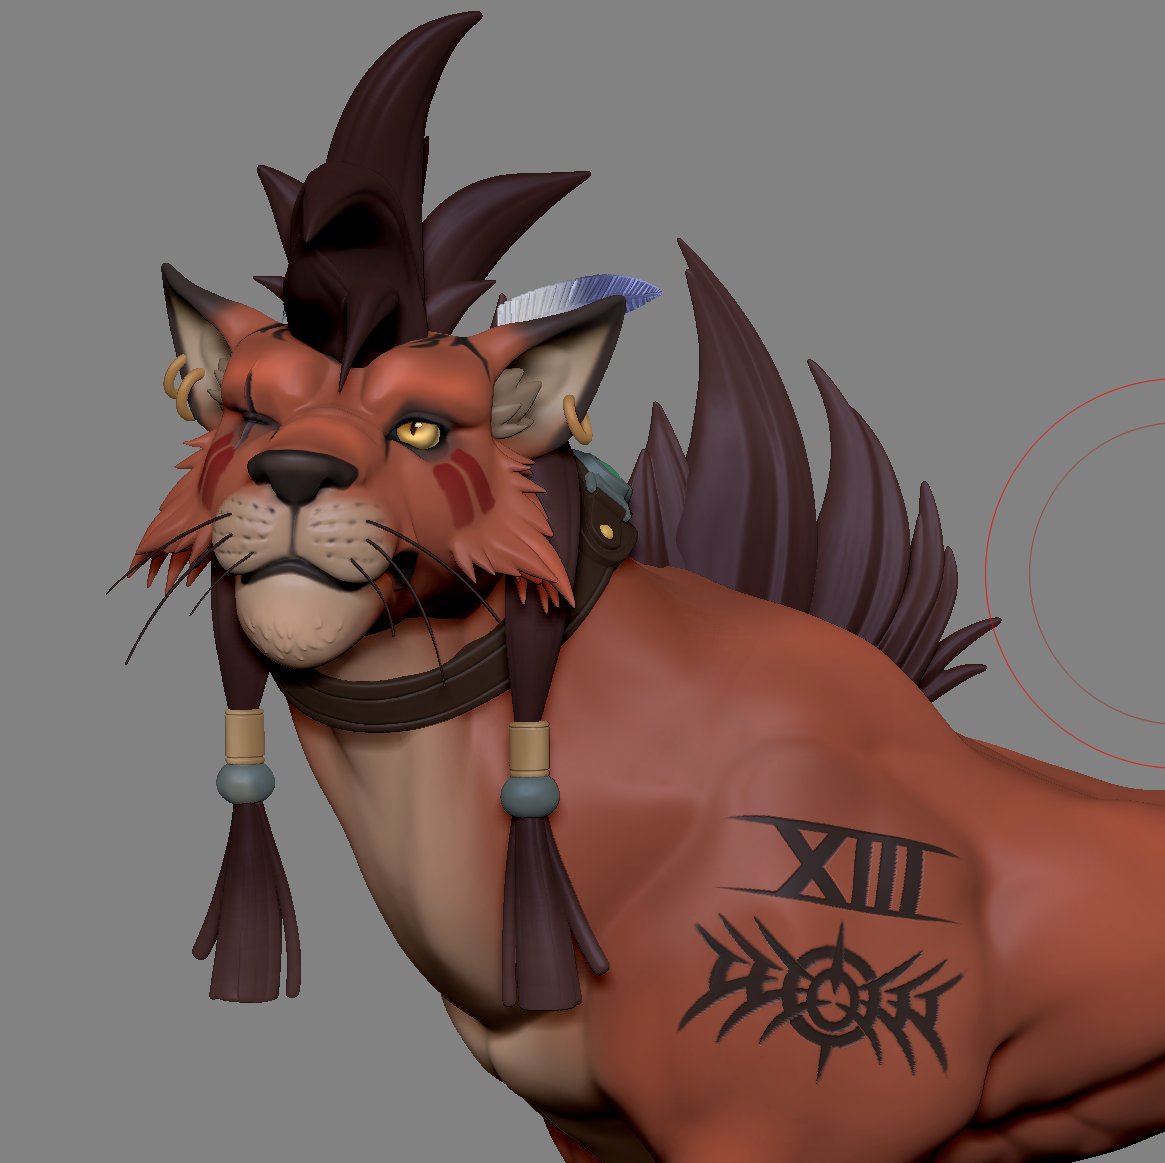 now working on the this public version of Nanaki #redXIII